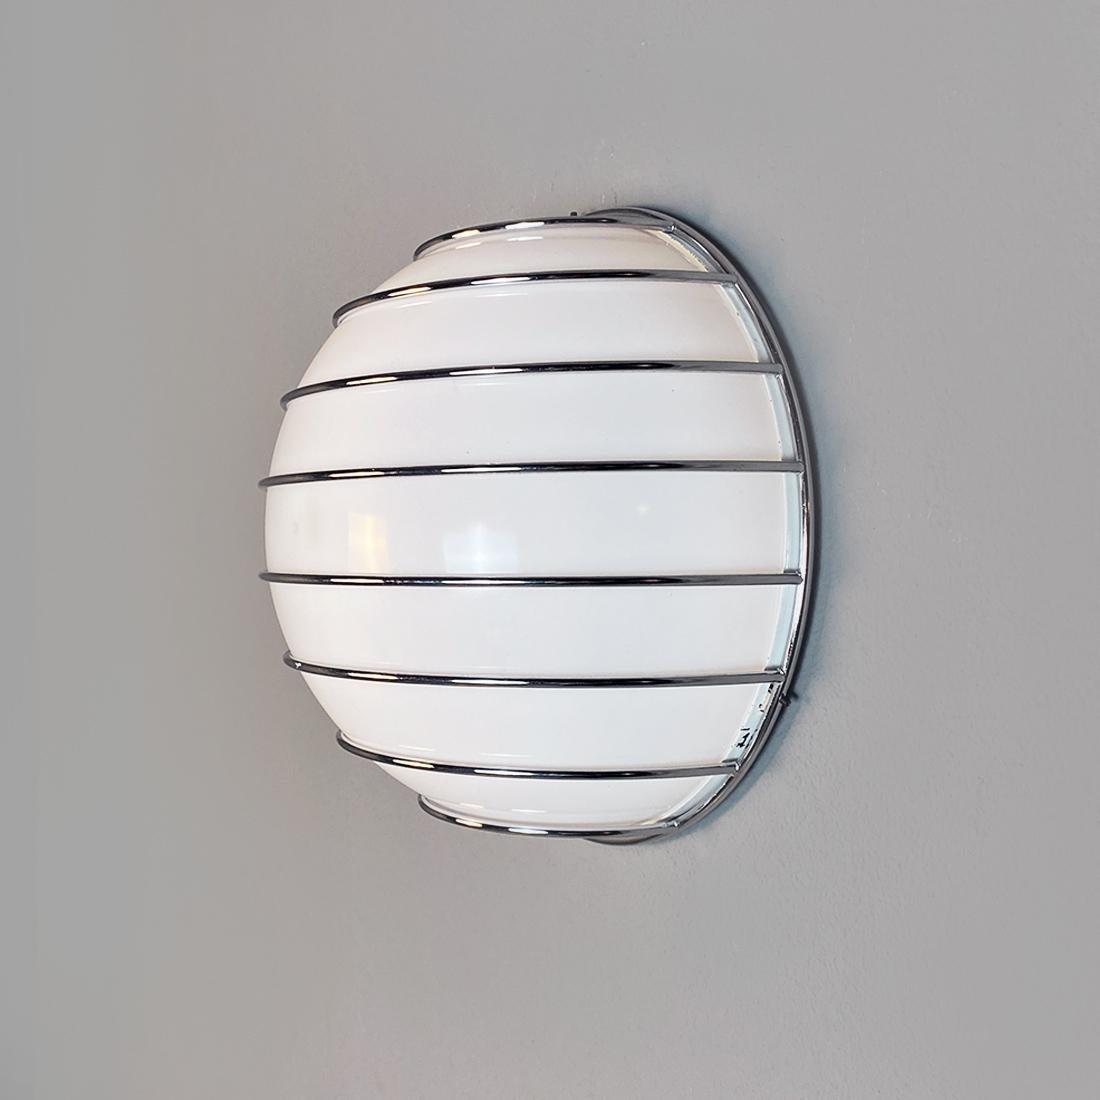 Italian Modern Metal Rod Structure and White Plastic Lampshade Wall Lamp, 1970s For Sale 4